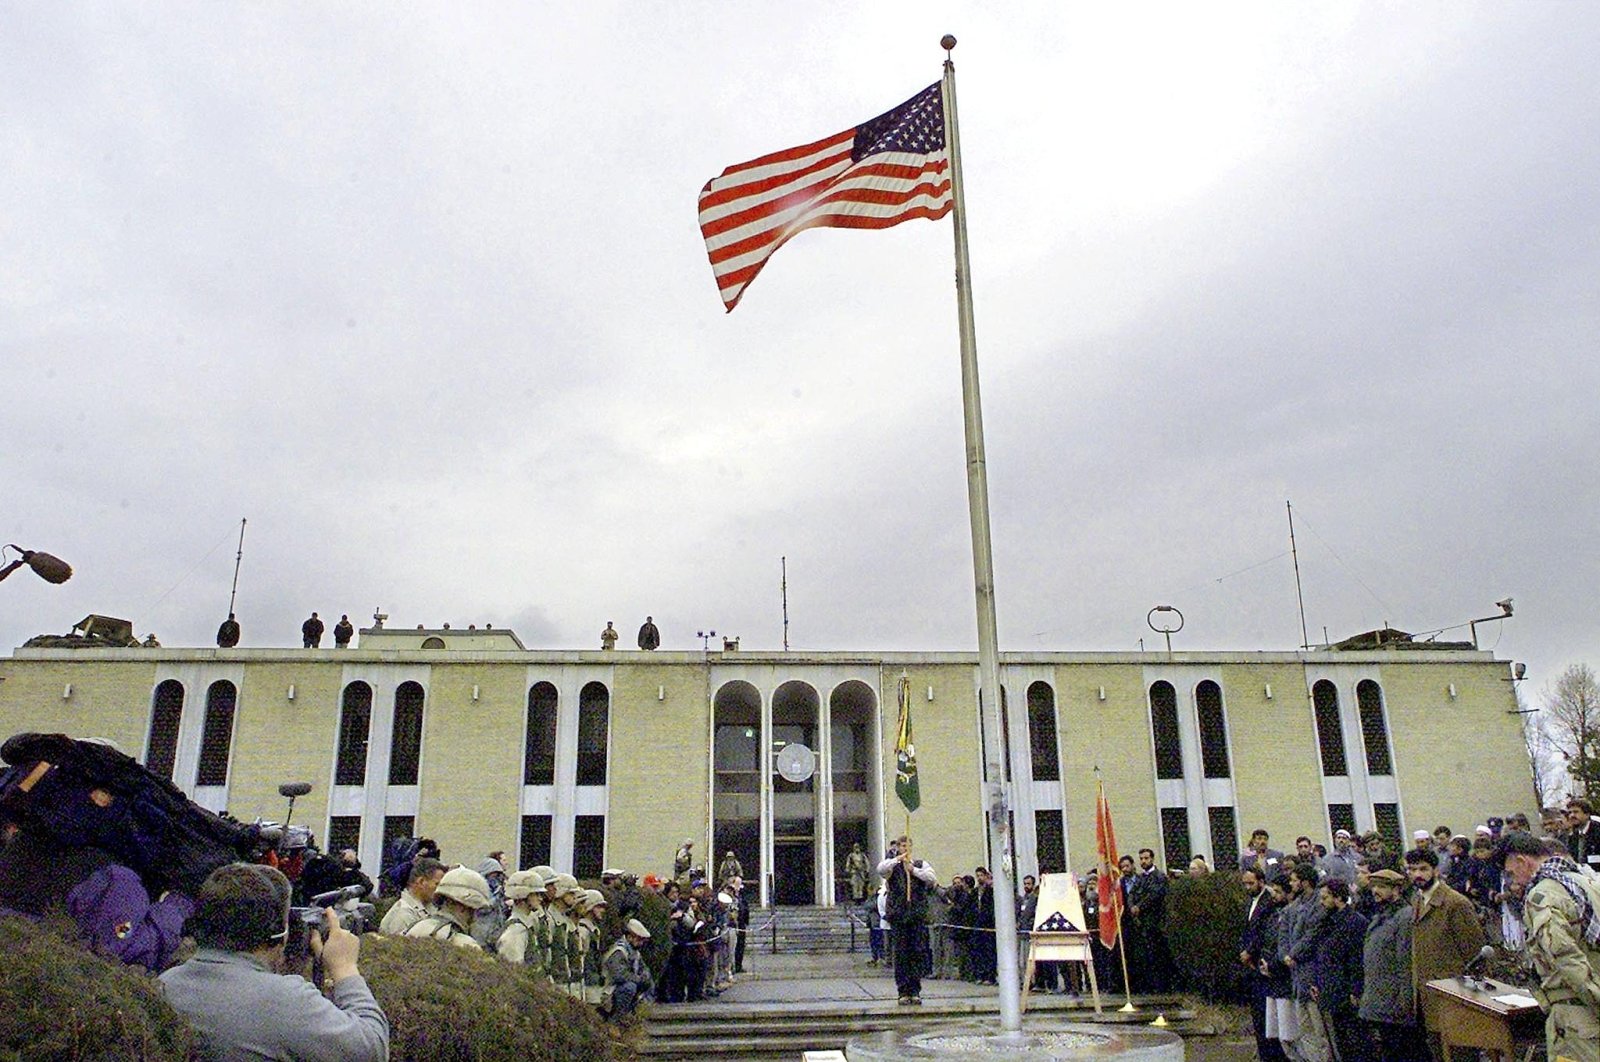 The American flag flutters after it was raised at the opening ceremony of the U.S. Embassy in the Afghani capital of Kabul, Afghanistan, Dec. 17, 2001. (AFP File Photo)